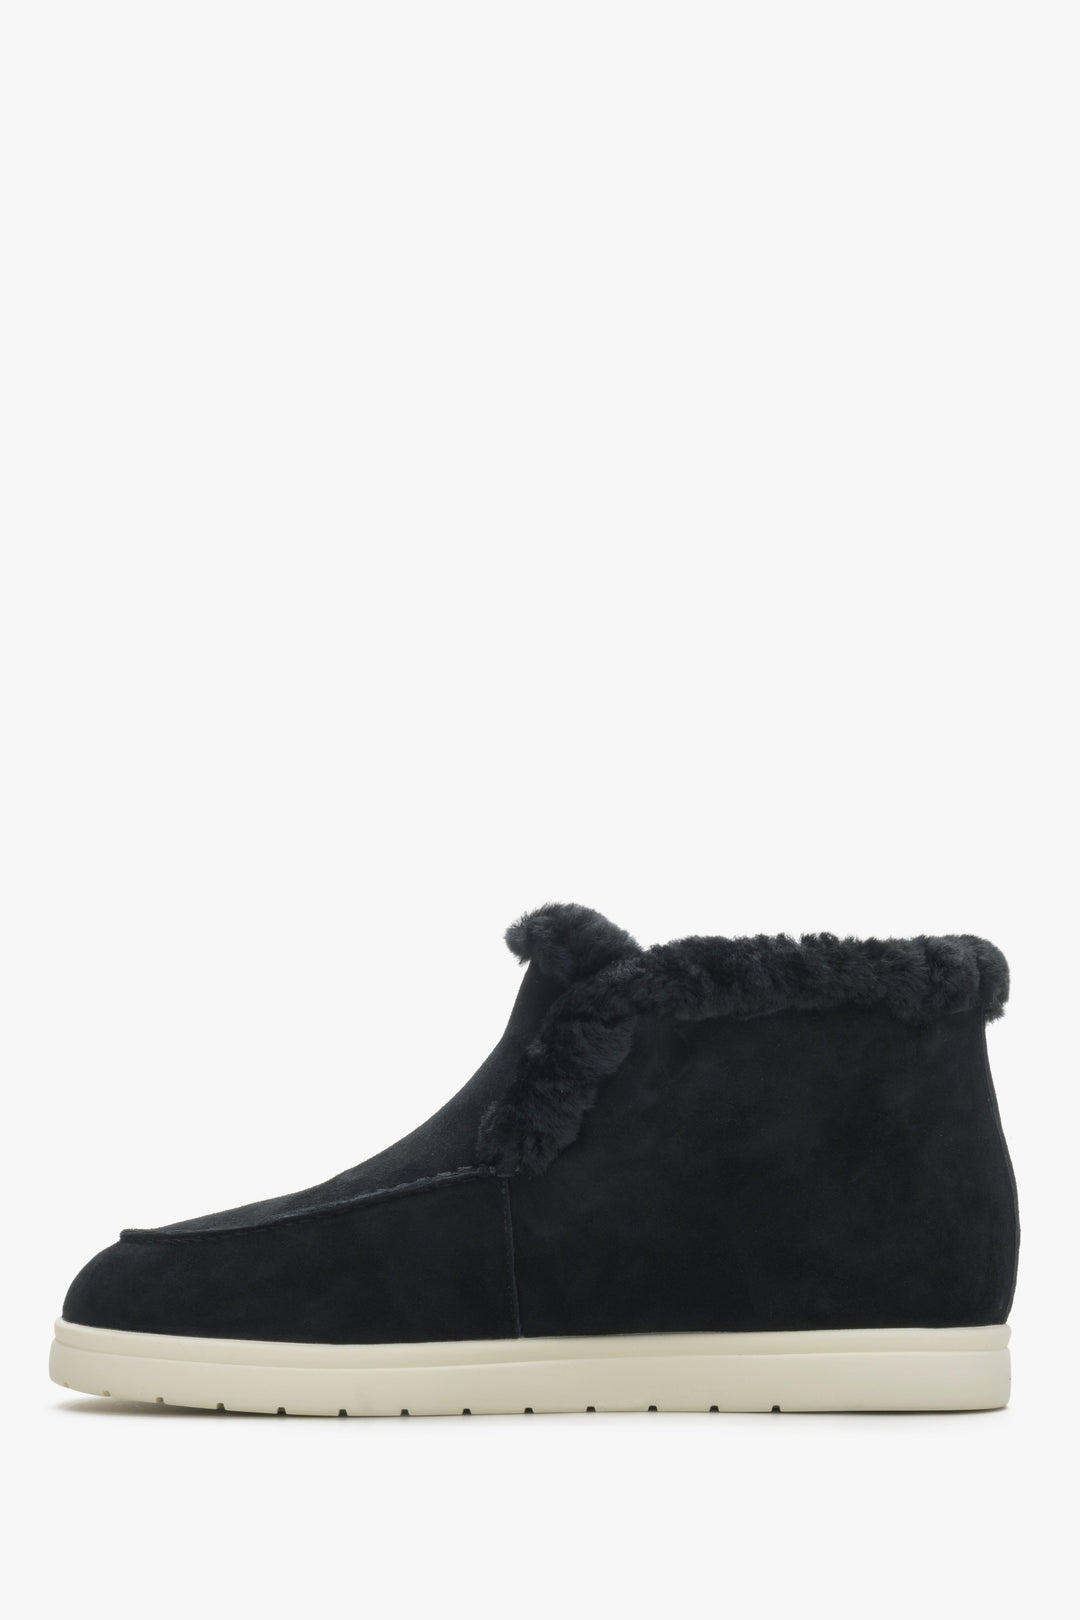 Women's low-top boots made of velour and fur in black colour Estro - shoe profile.